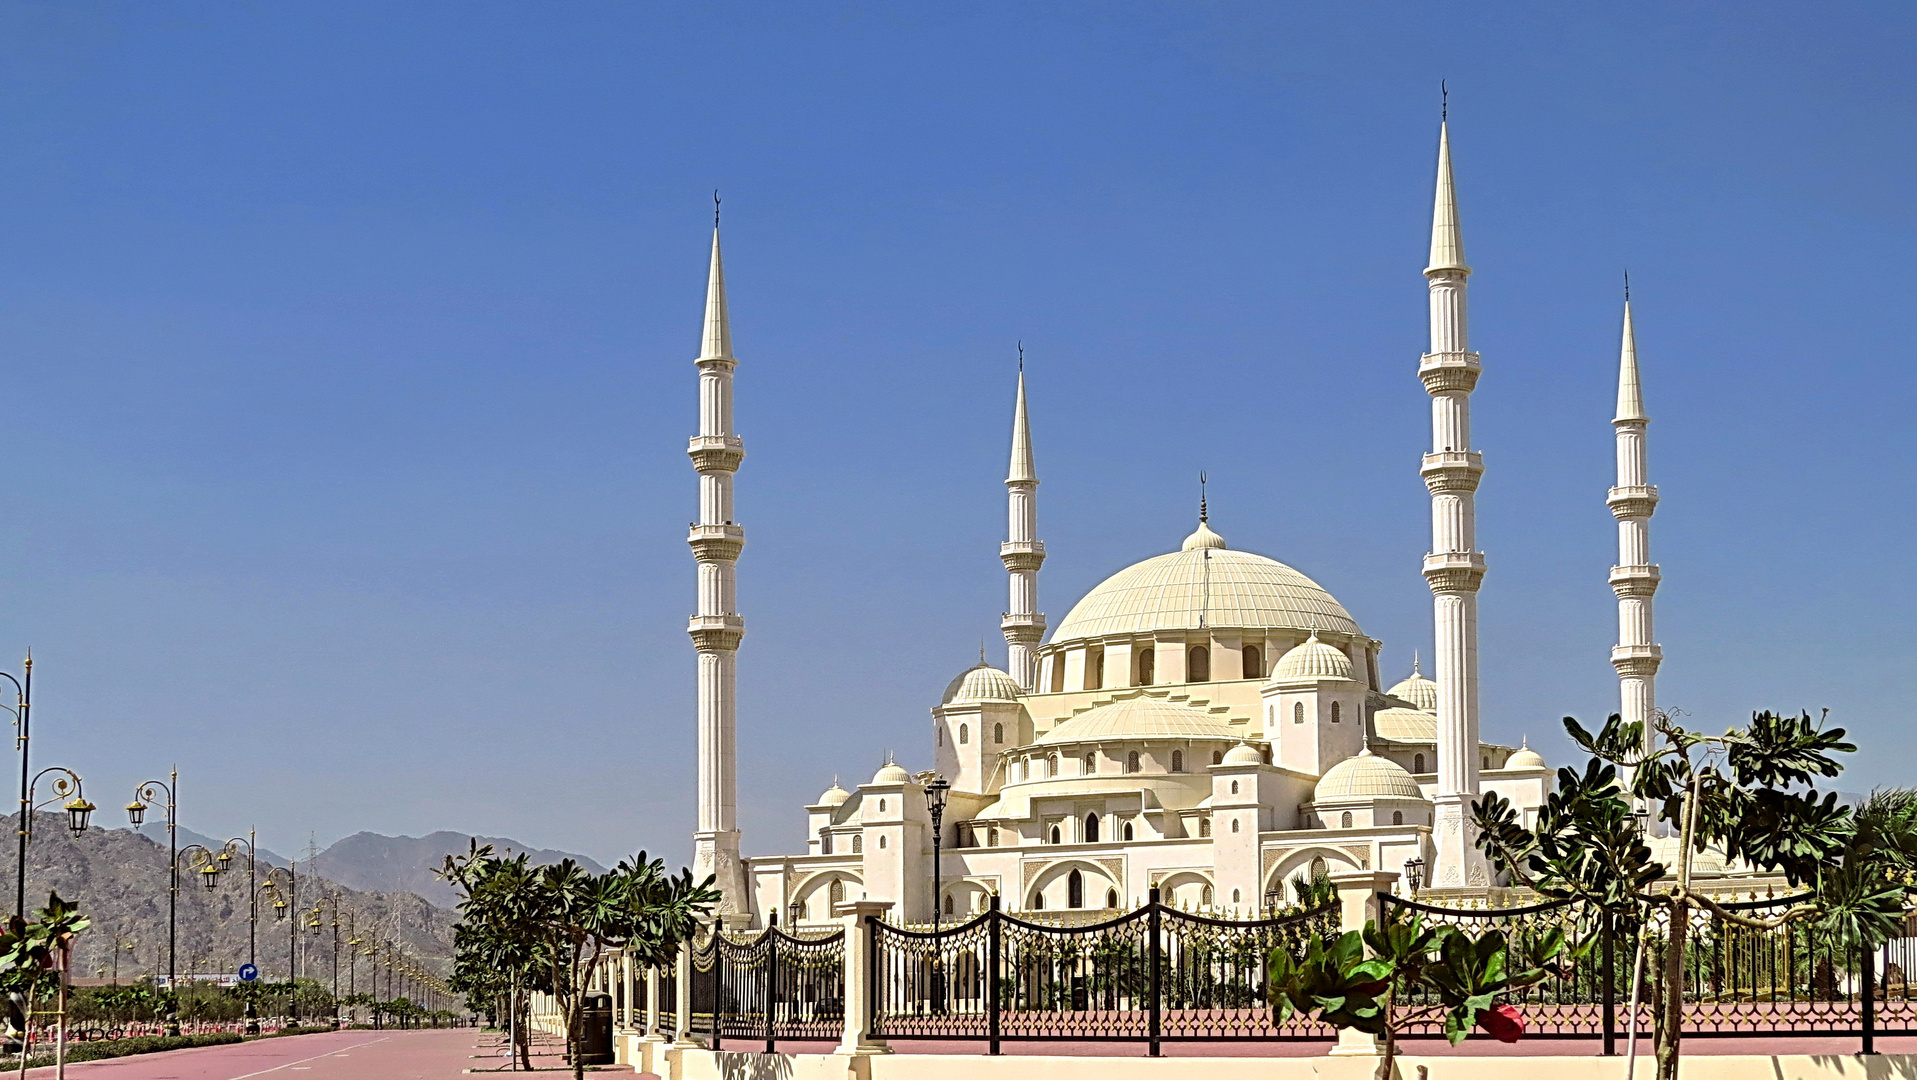 The  Sheikh Zayed Grand Mosque